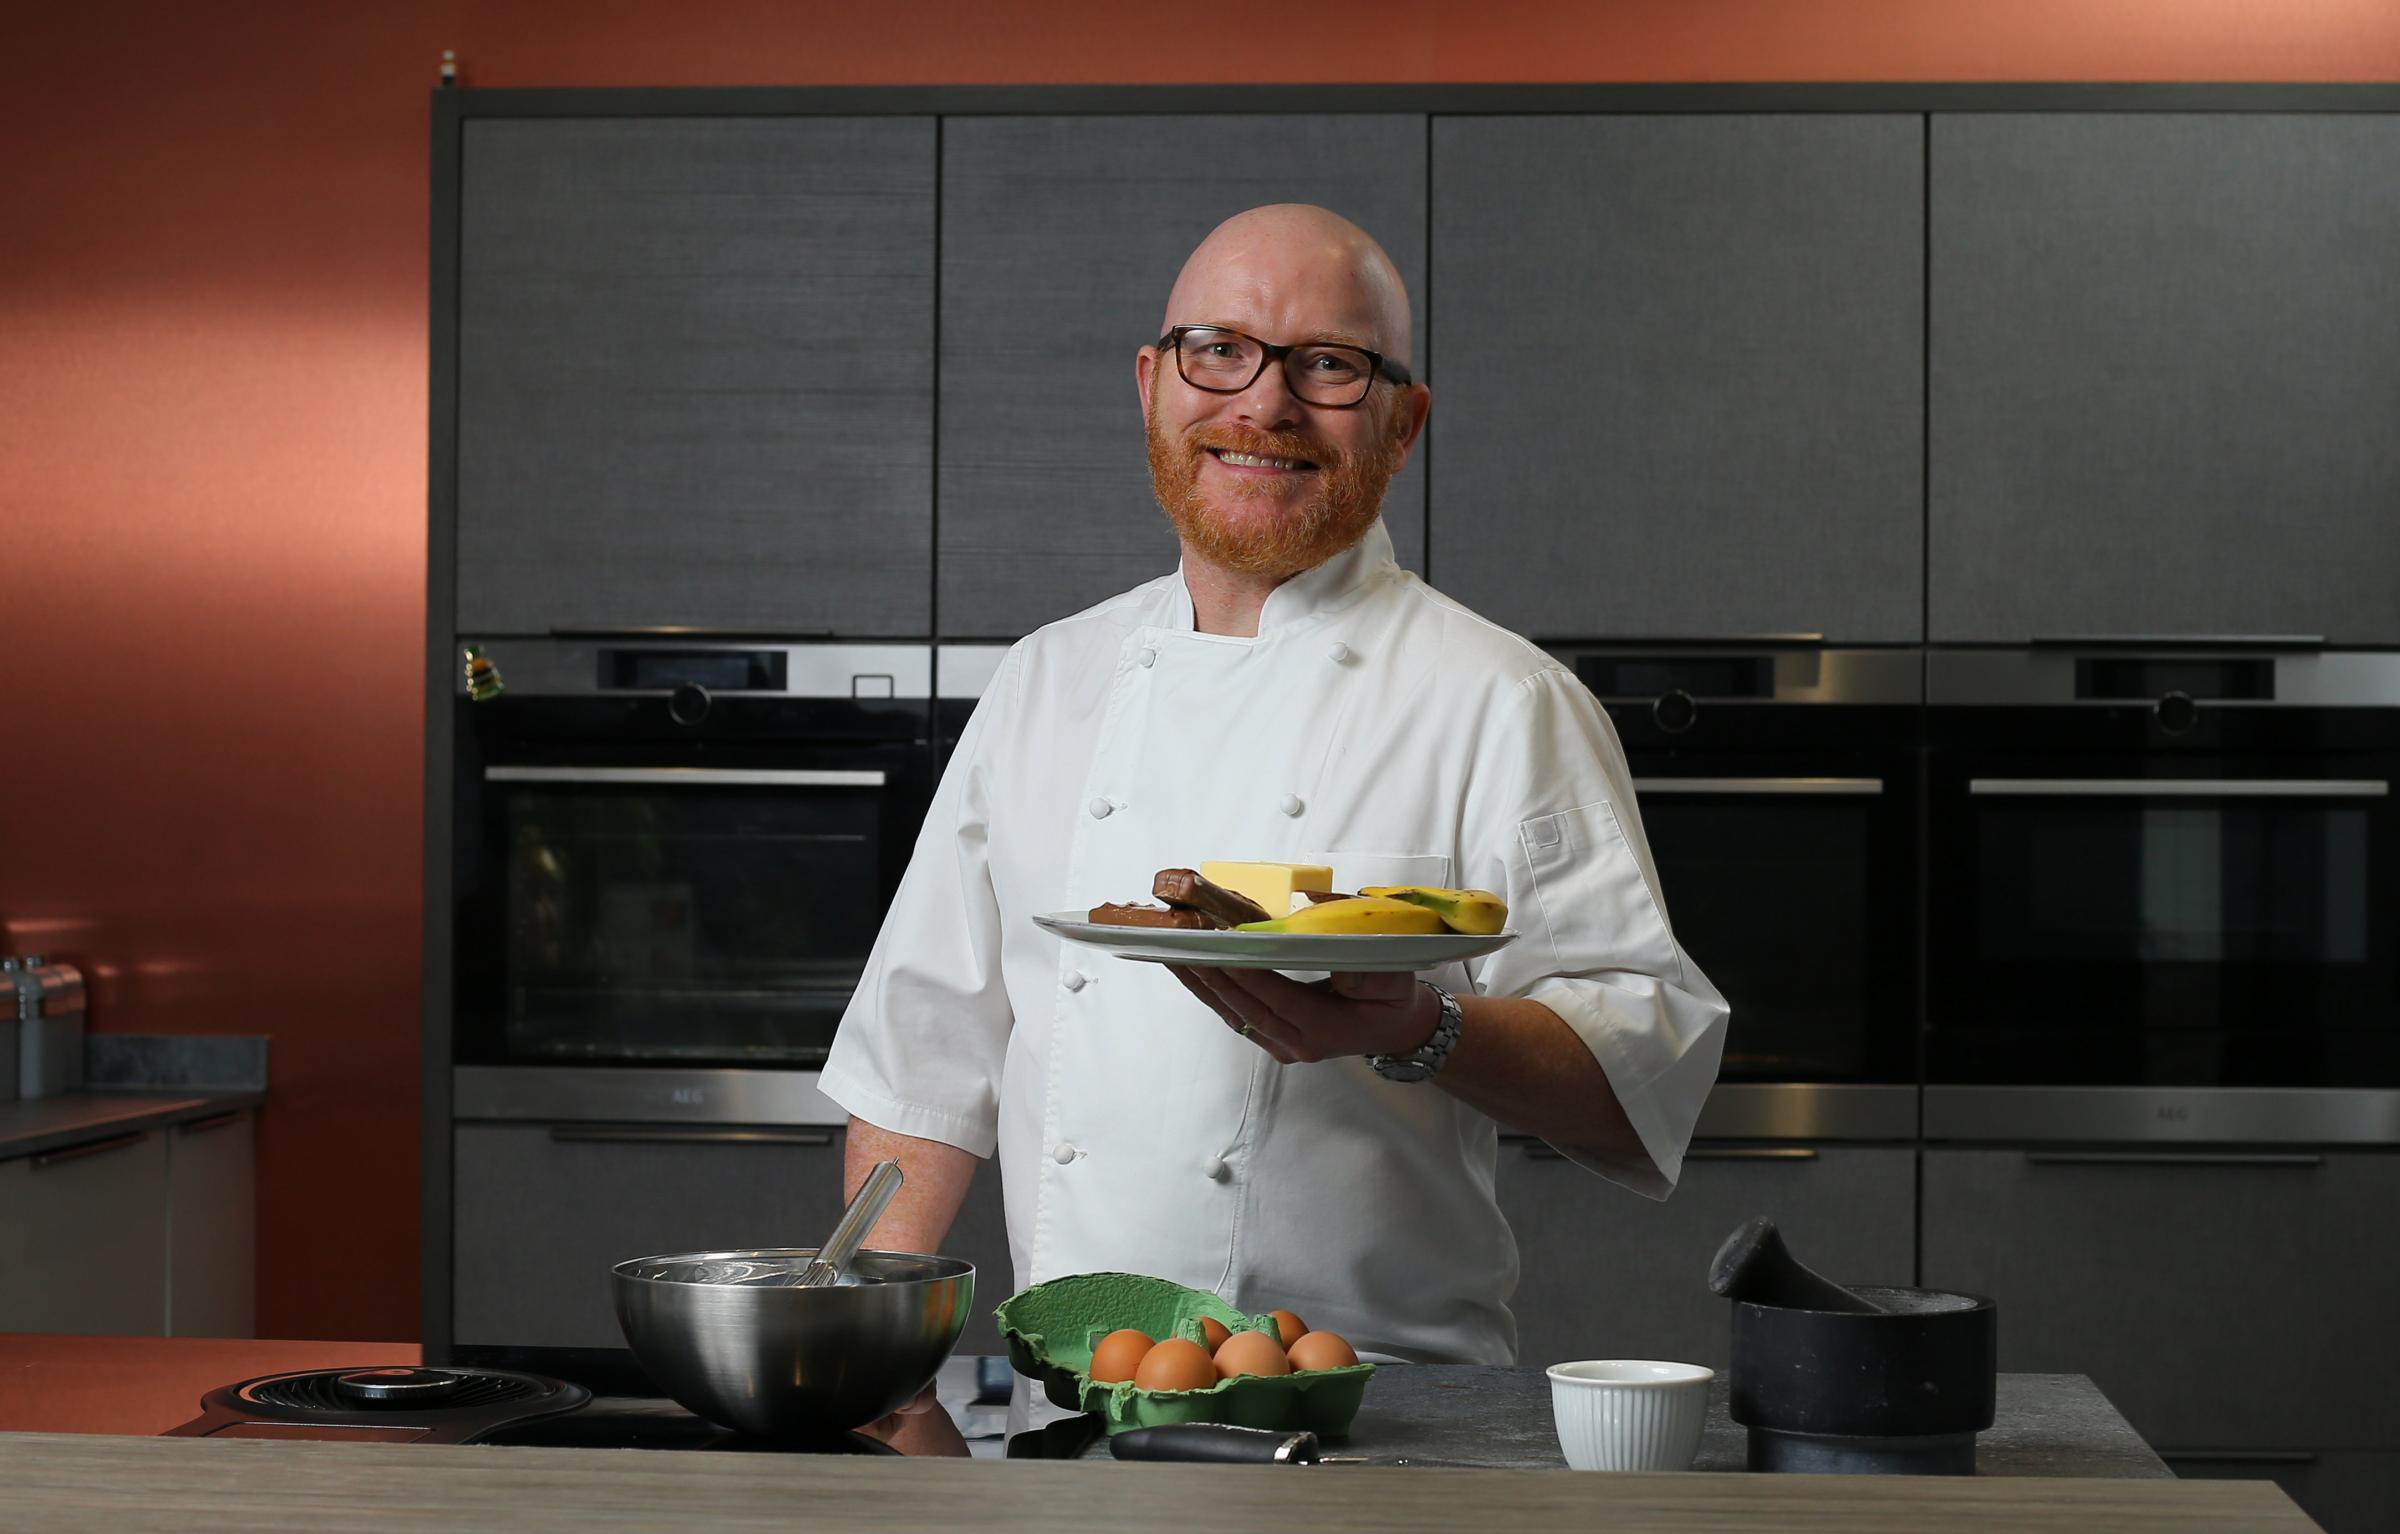 Gary MacLean is delighted with the award from the Saint Andrews Society of New York